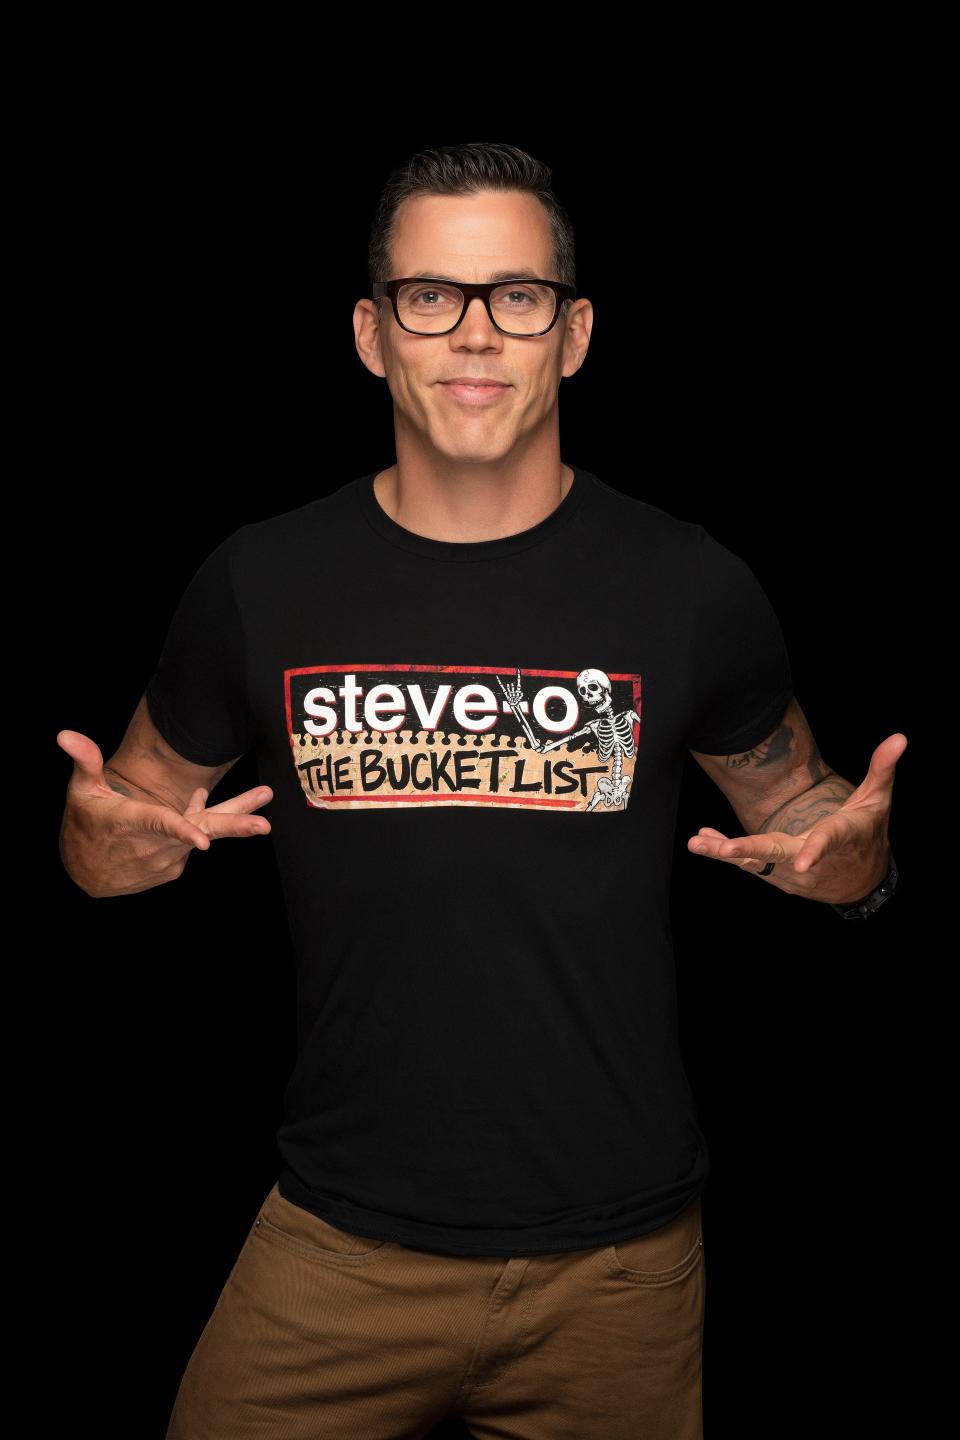 "The Bucket List Tour," a multimedia comedy show hosted by Stephen Glover, more popularly known as Steve-O, is coming to Springfield's Gillioz Theater Friday, March 18 at 7 p.m. The show includes stand-up comedy and video recaps of Glover's "bucket list" stunts and pranks. Tickets for "The Bucket List Tour" are on sale now on the Gillioz Theater website.